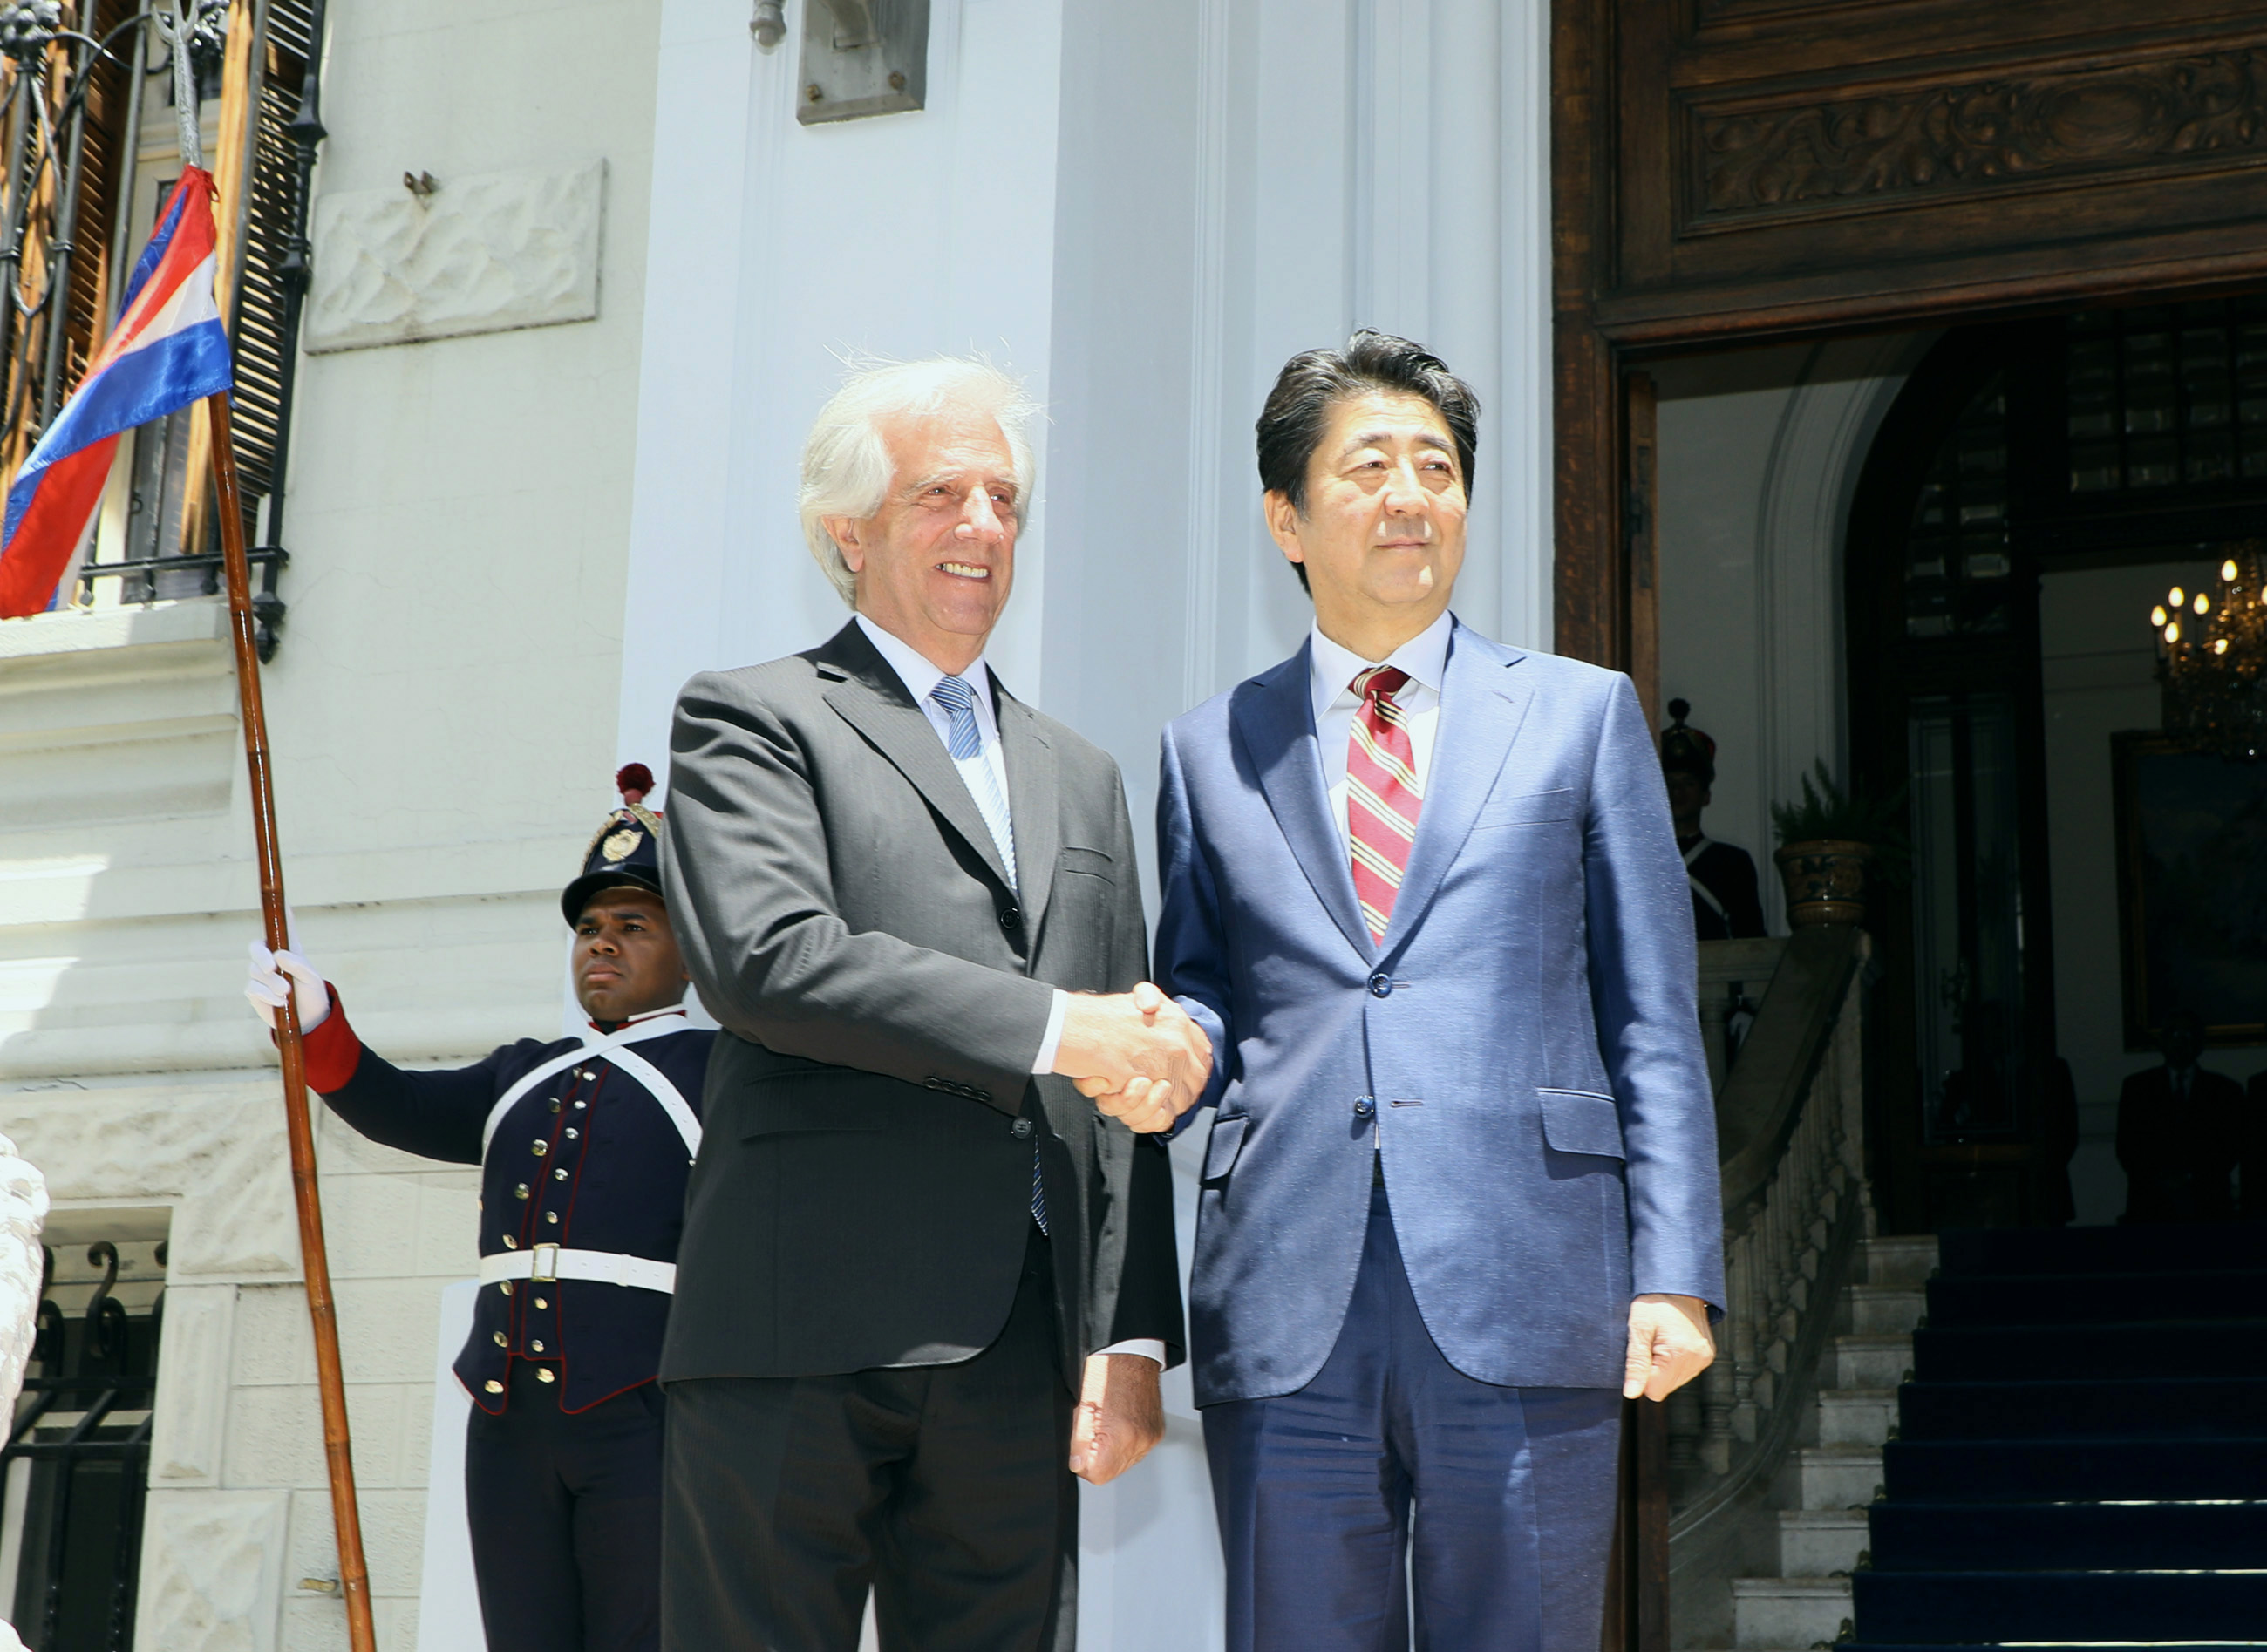 Photograph of the Prime Minister shaking hands with the President of Uruguay